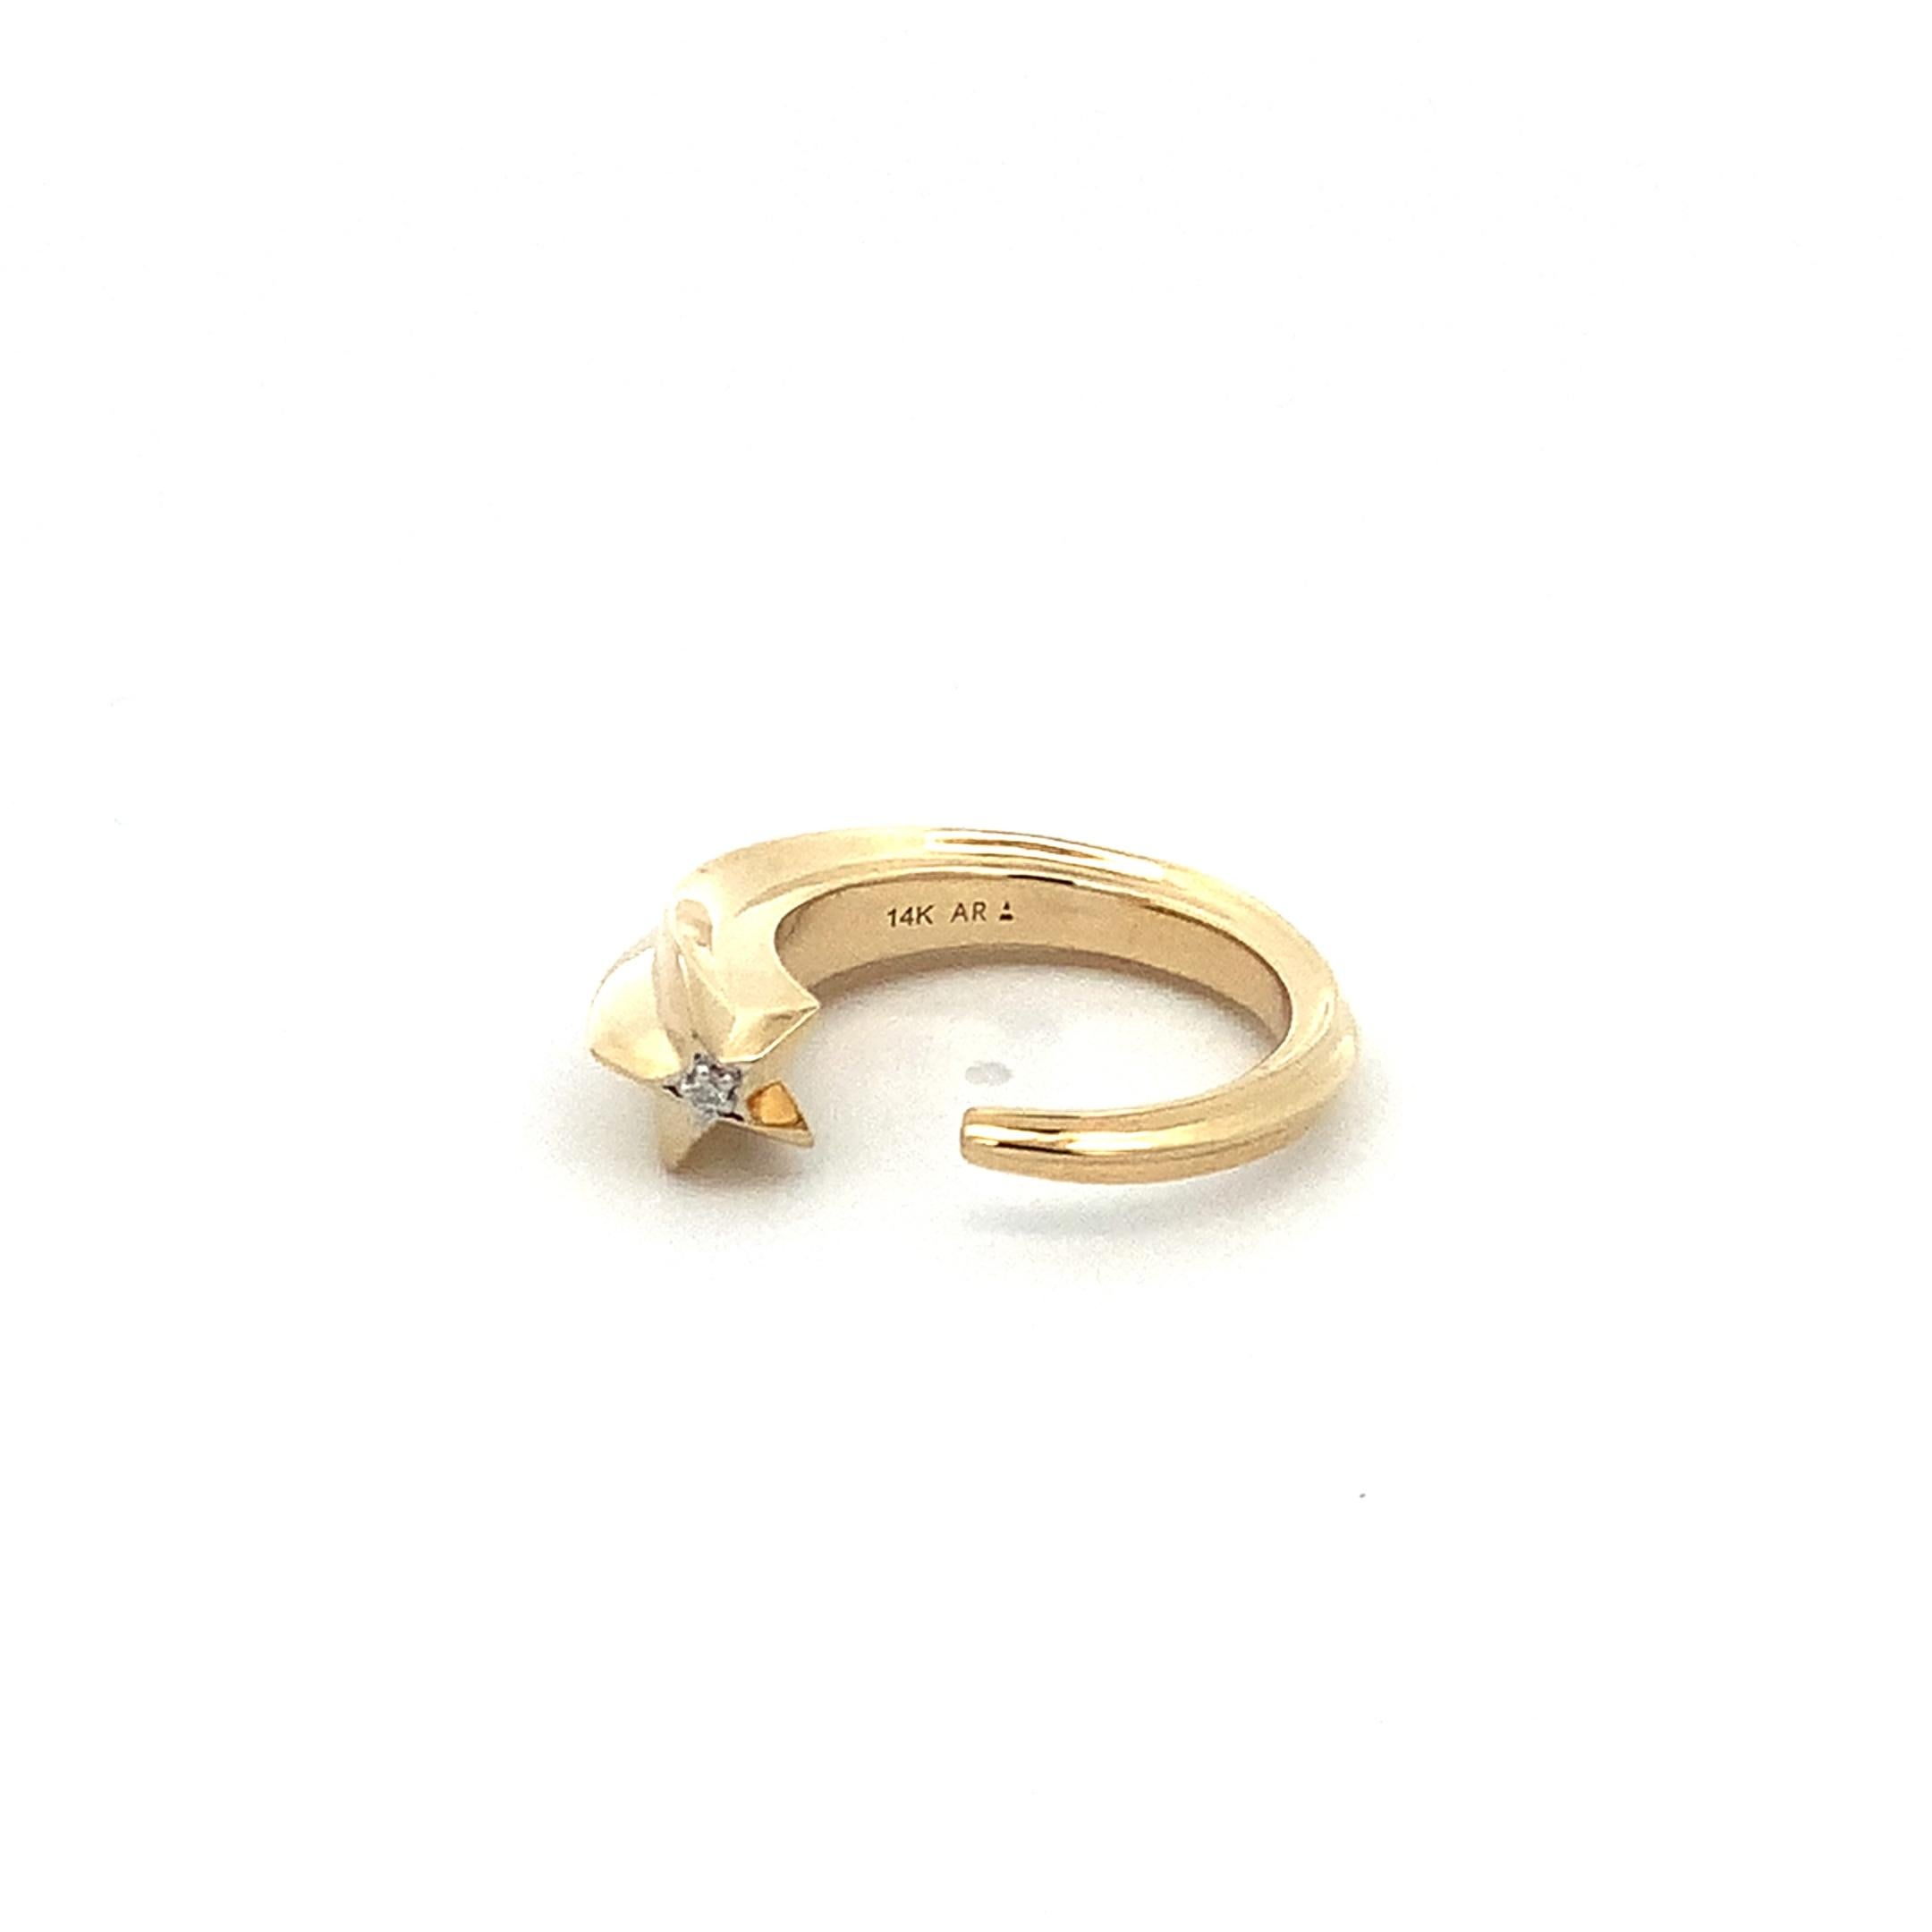 Adina Reyter One of a Kind Thick Thick Shooting Star Open Ring

14k yellow gold open band ring with hand-set diamond shooting star. Shoot for the stars in this ring!

Ring size 6.

Total Diamond Carat Weight: 0.008 ct

Ring pictured on pointer